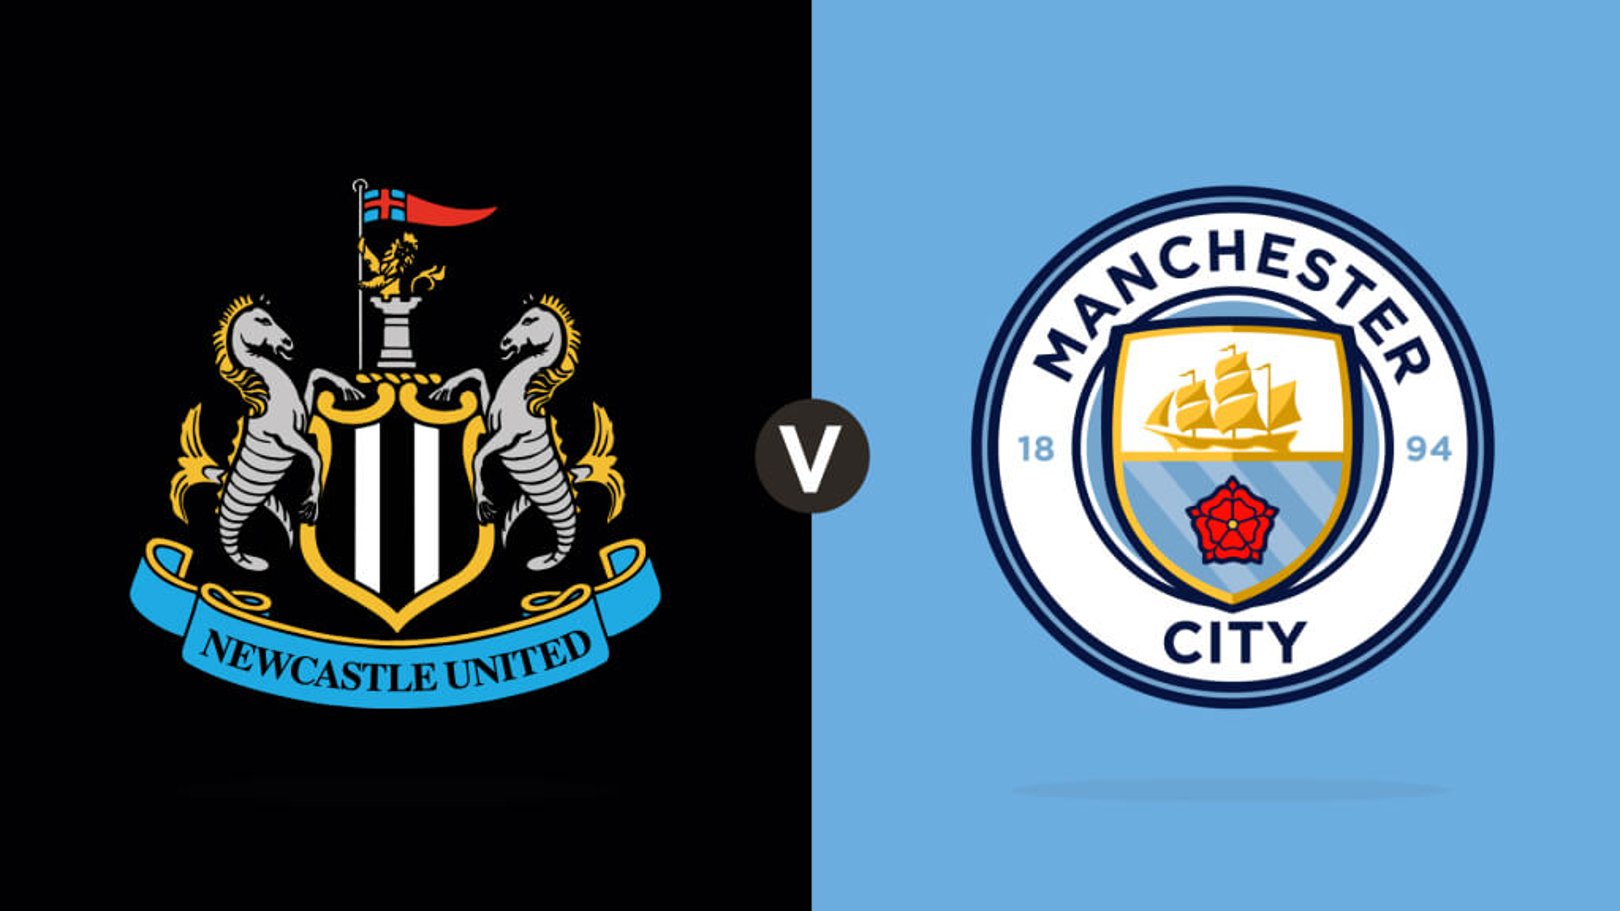 Newcastle United v City: Match and player stats